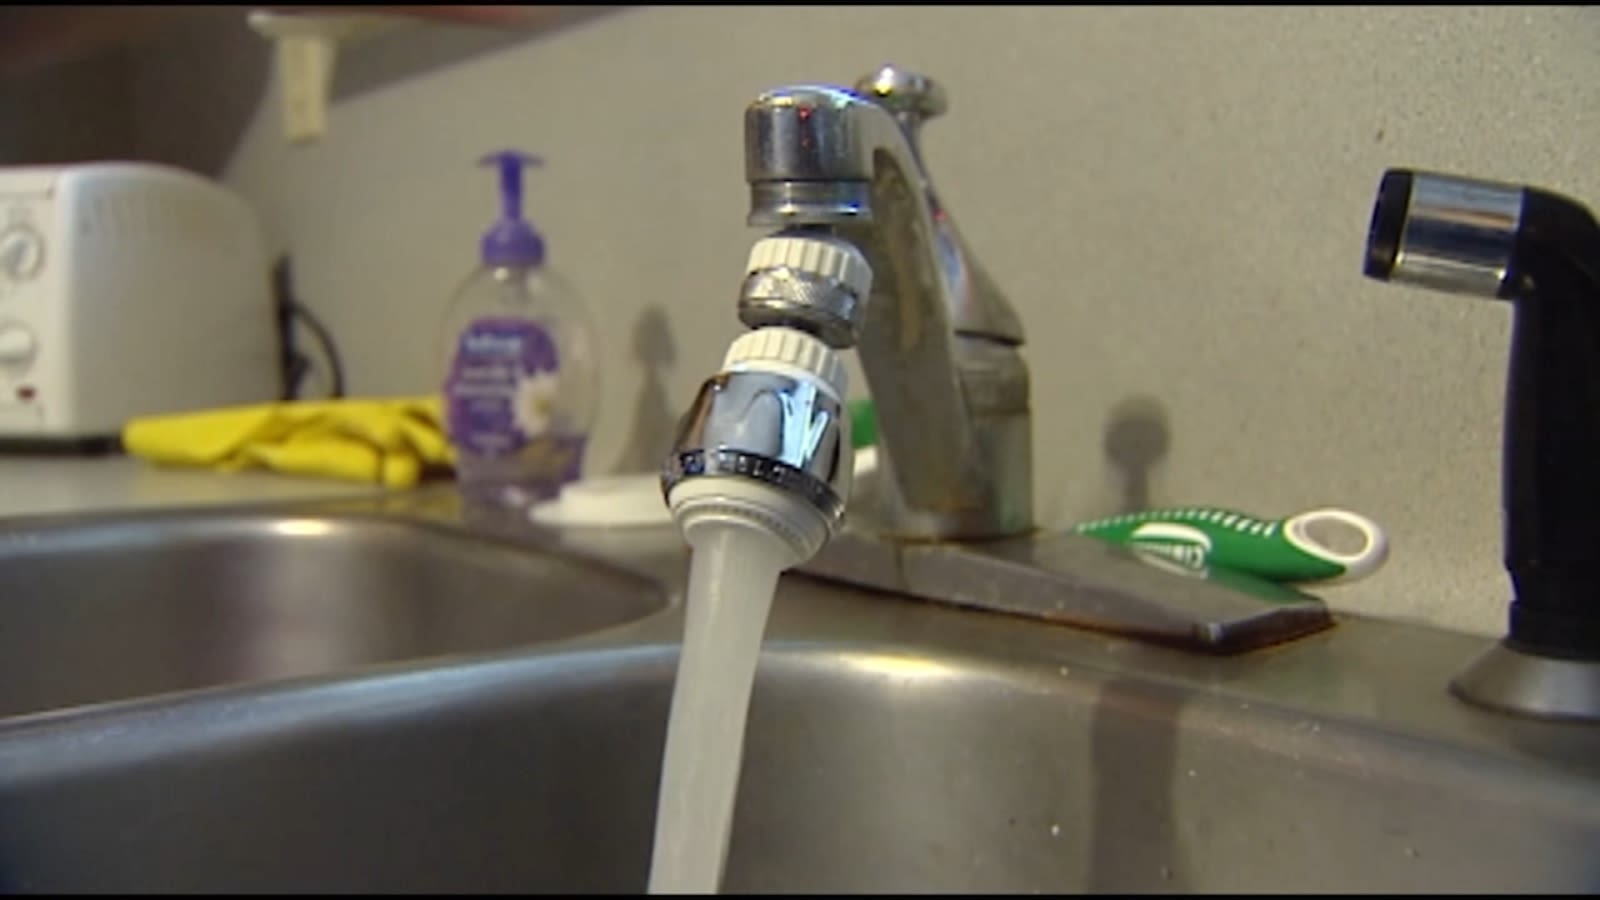 Houston Public Works plans to send a 'set rate' to water customers in May to reduce high bills